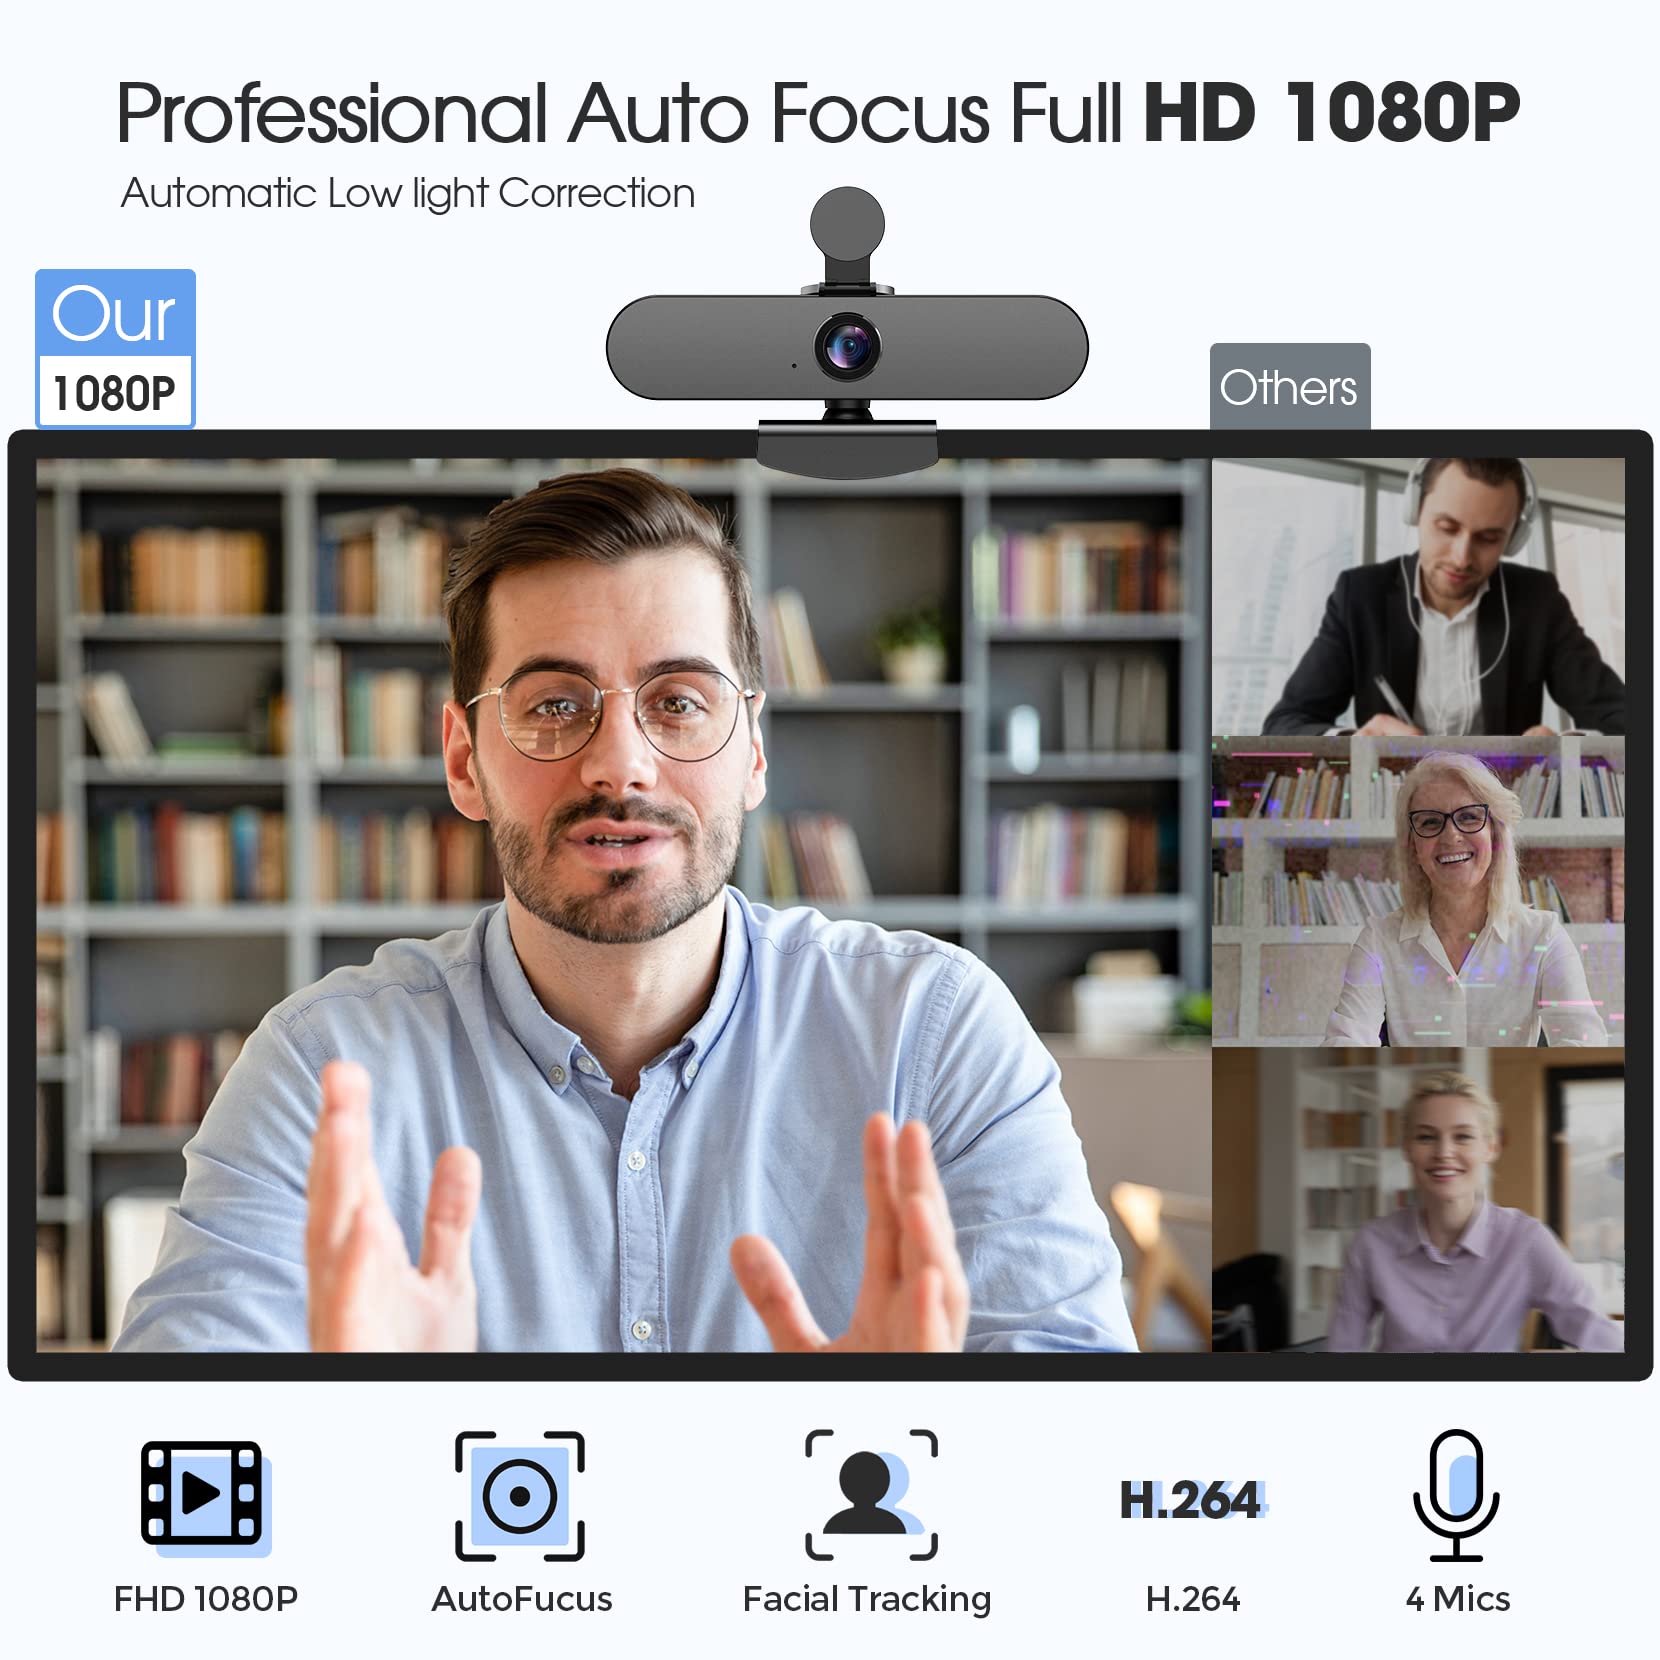 1080P Streaming Webcam with 4 Microphones, Advanced Autofocus, Privacy Shutter and Tripod - Perfect for PC, Laptop and Desktop Computer, with Noise Reduction and Super Stereo Mic